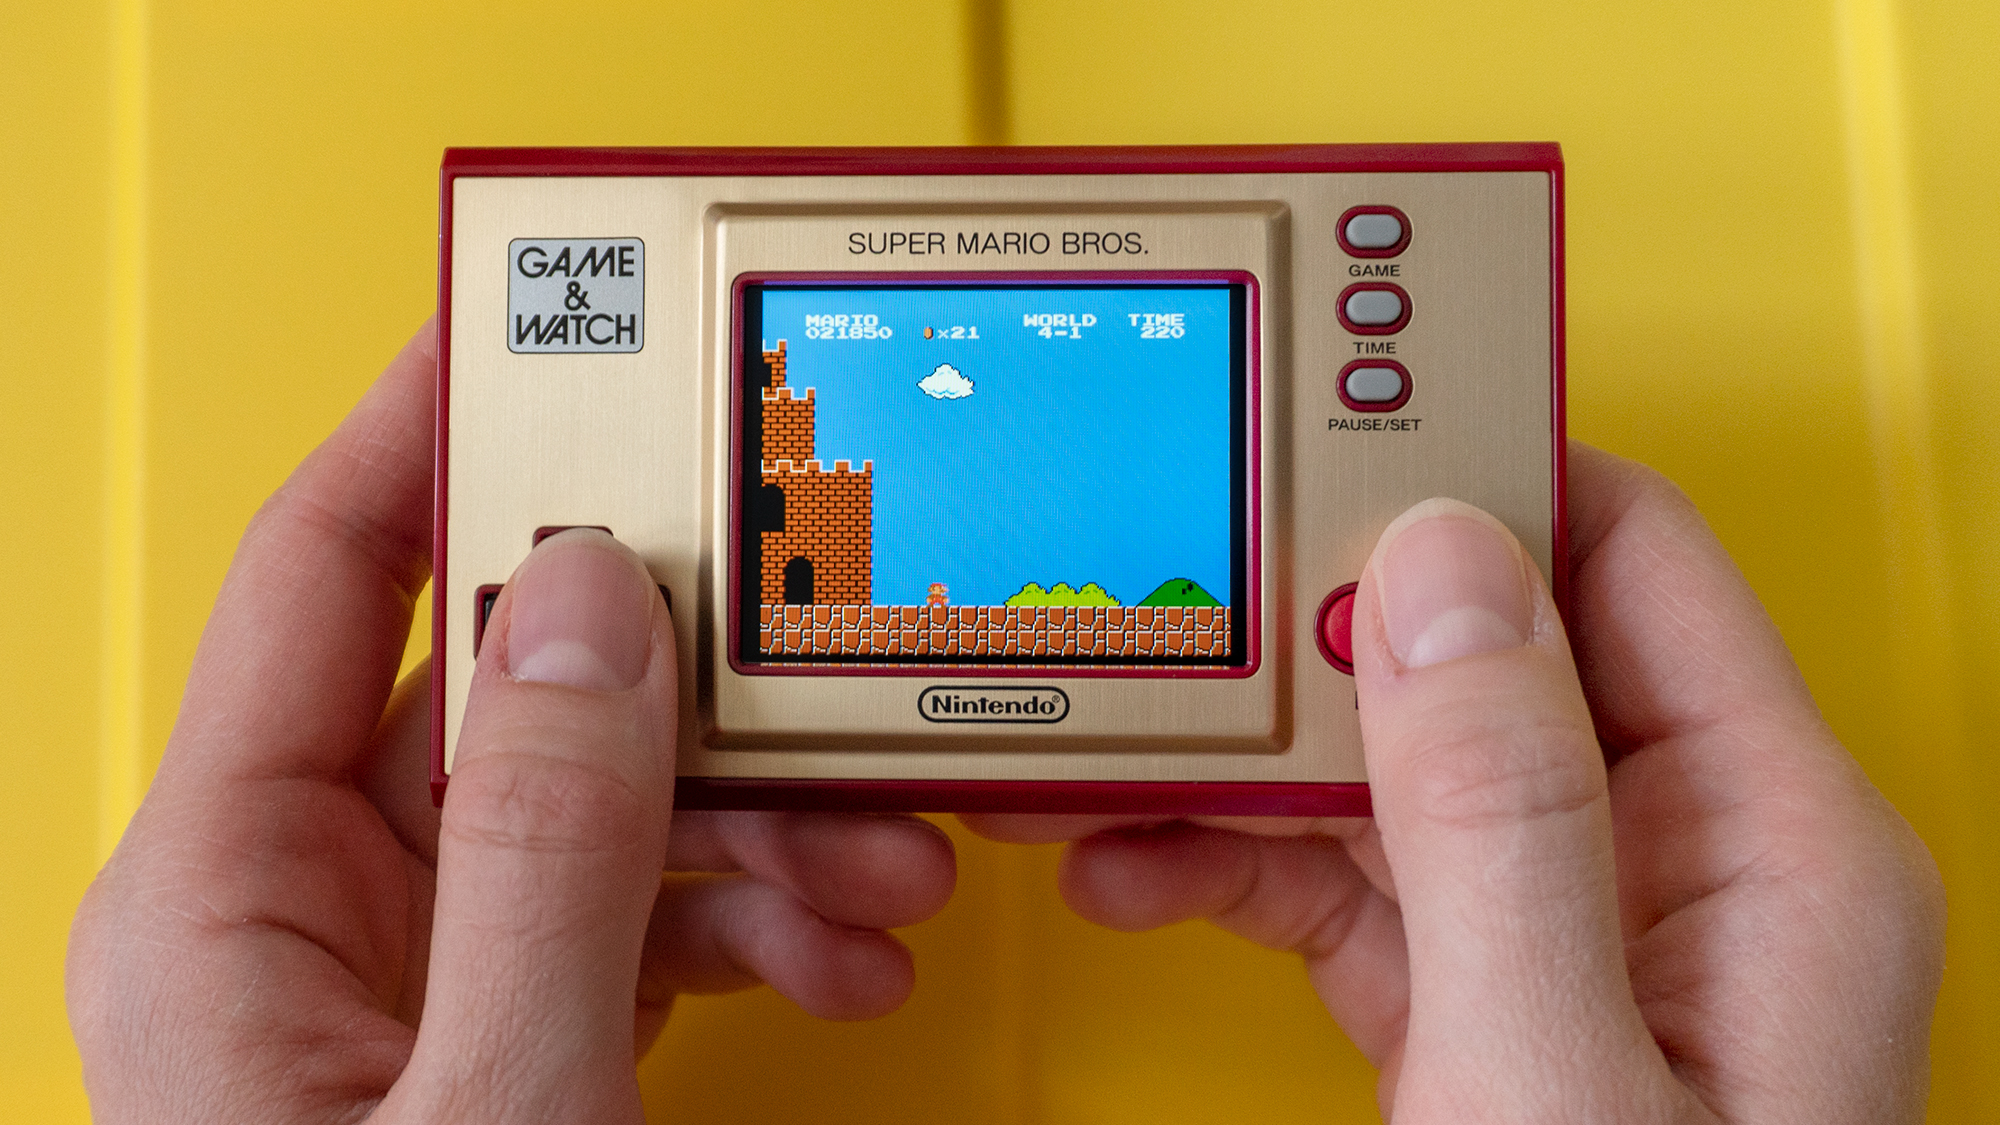 The gold and red colour scheme isn't my favourite, but I understand it's paying homage to the Japanese Famicom. (Photo: Andrew Liszewski - Gizmodo)